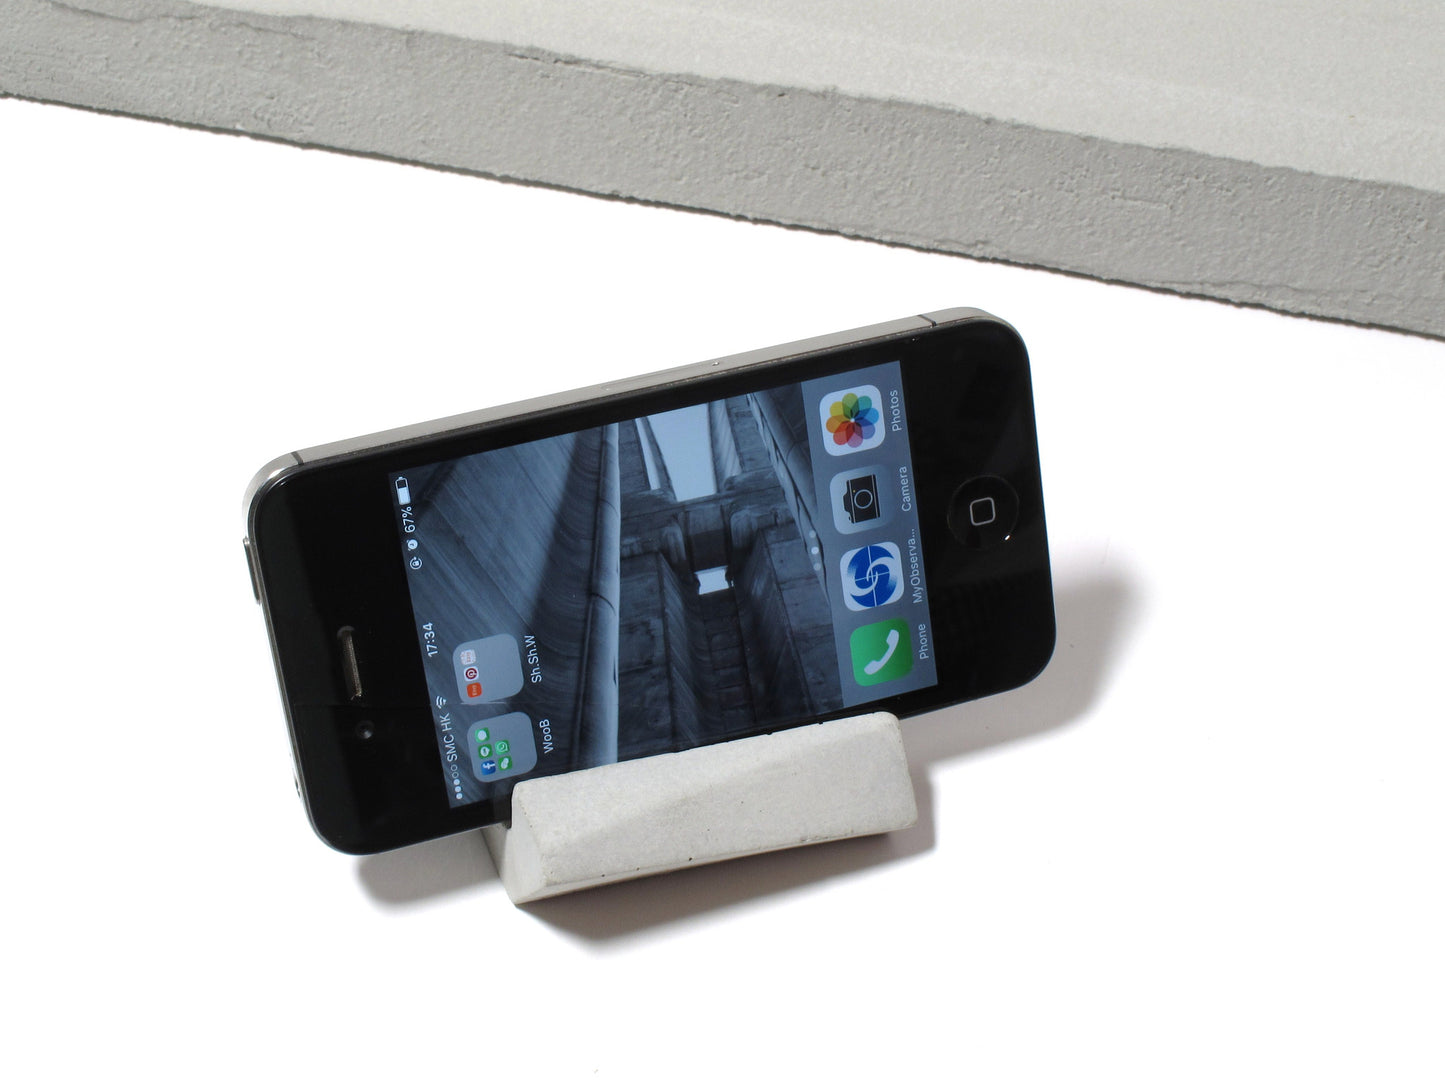 Concrete mobile phone viewing stand (Geometric design)